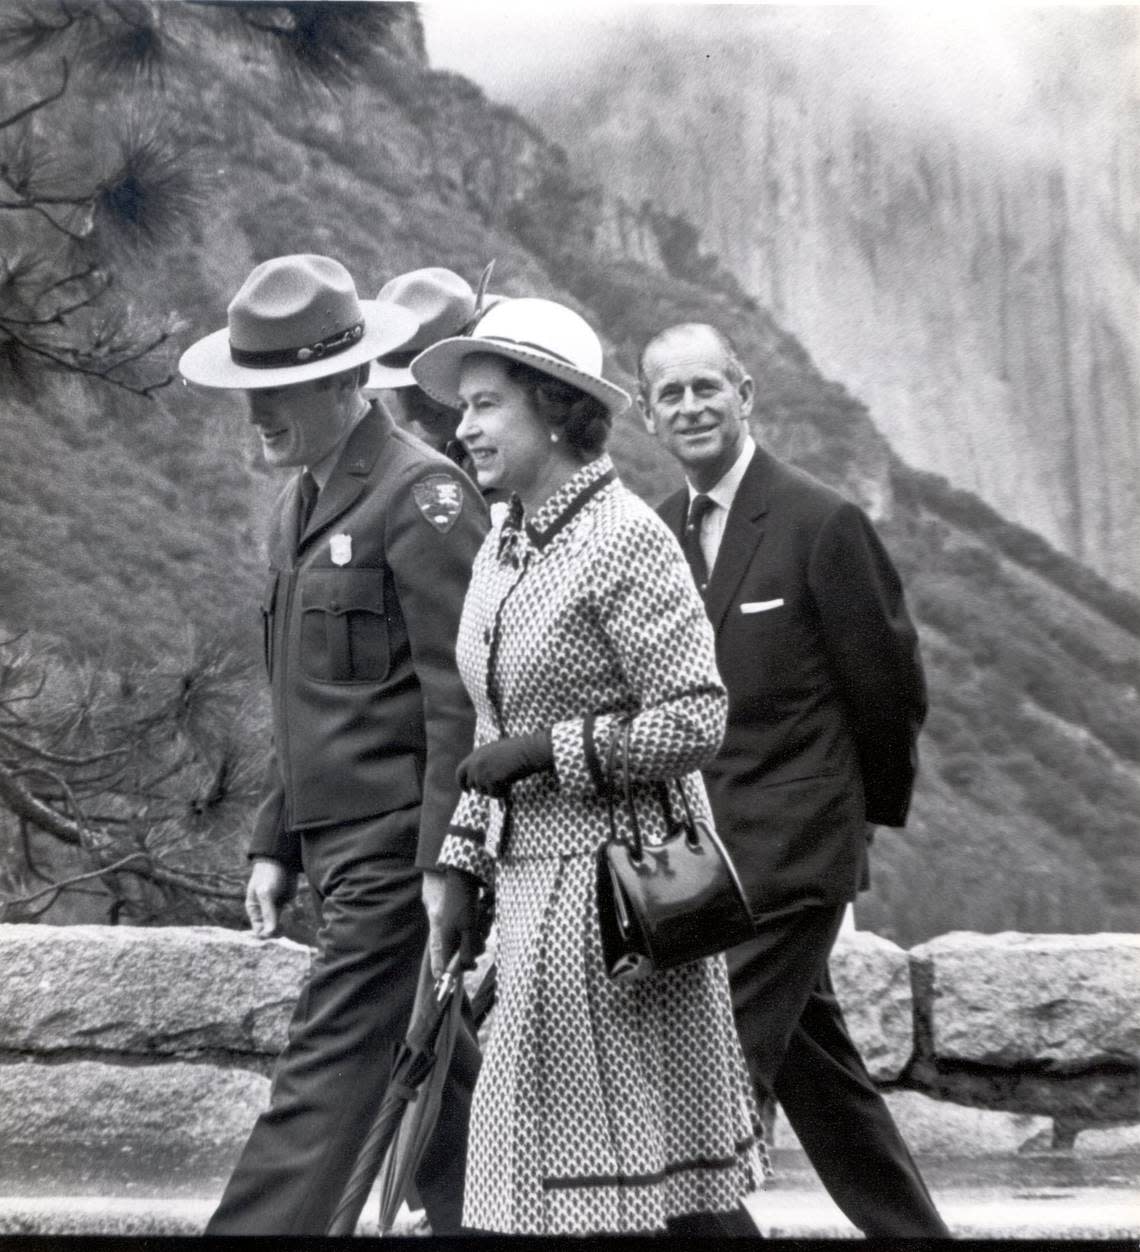 Queen Elizabeth II walks with rangers and her husband, Prince Philip, during her 1983 visit to Yosemite National Park. Richard J. Darby/Fresno Bee archive